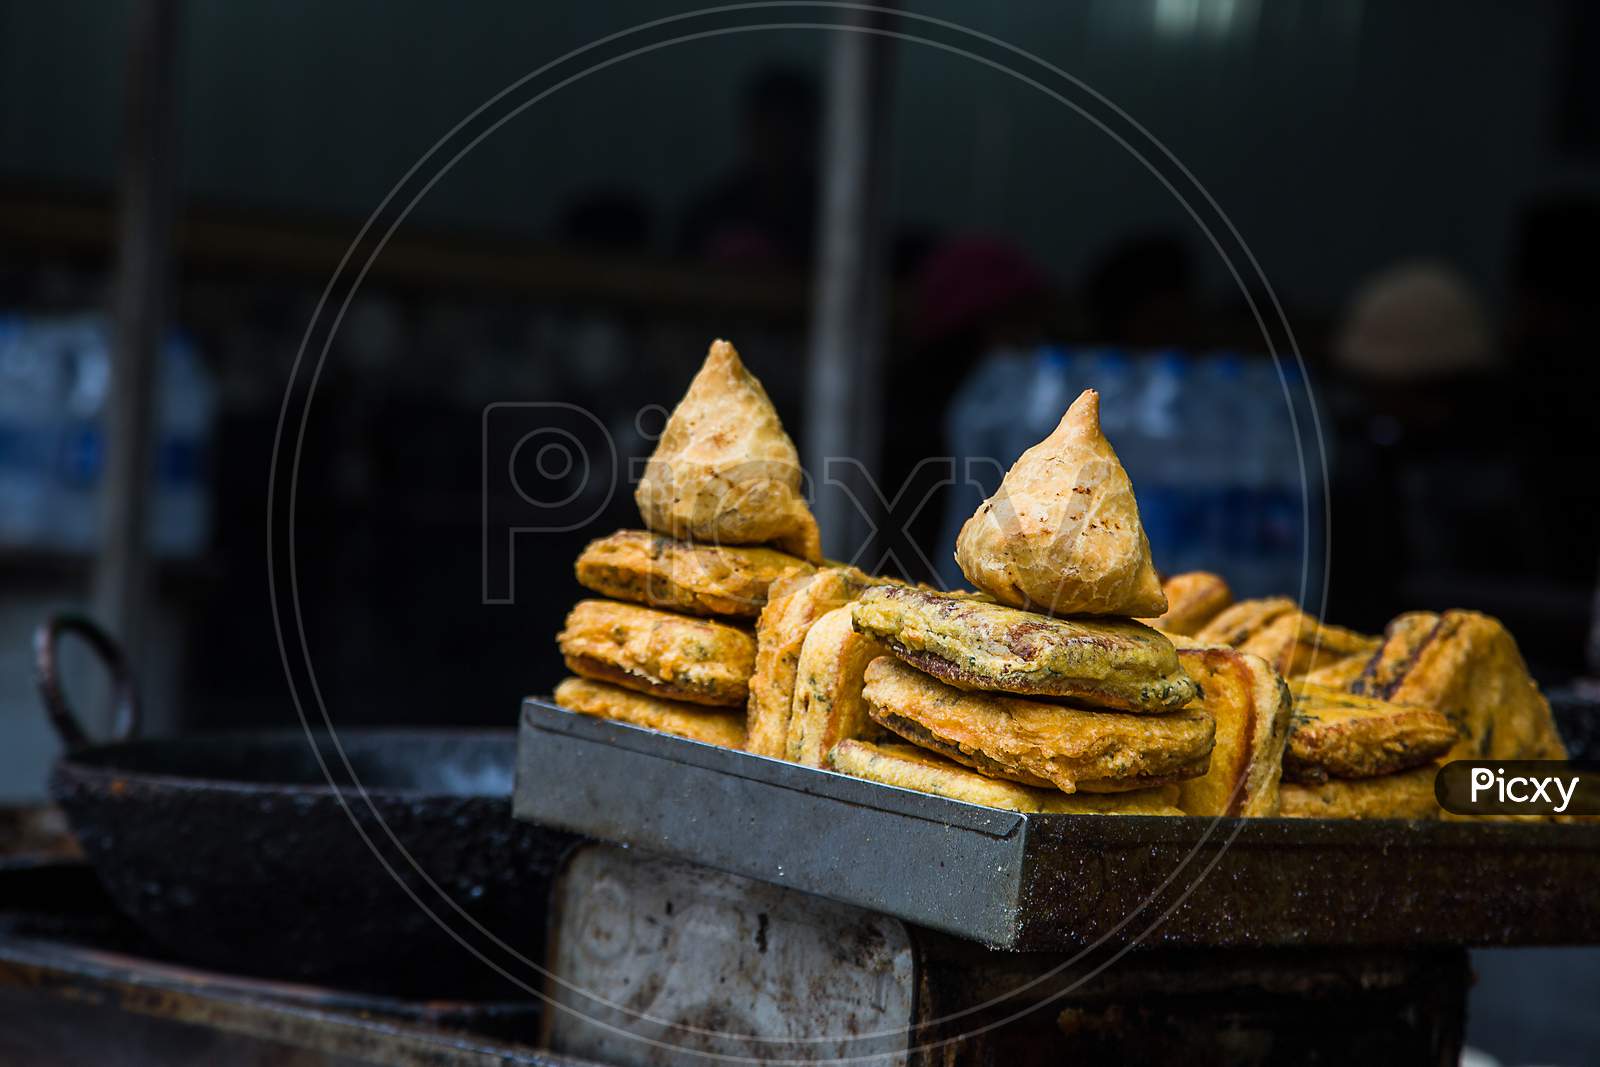 Delicious Spicy Indian Street Food, Fried Samosa, Healthy Homemade, Asian Cuisine Concept. - Image